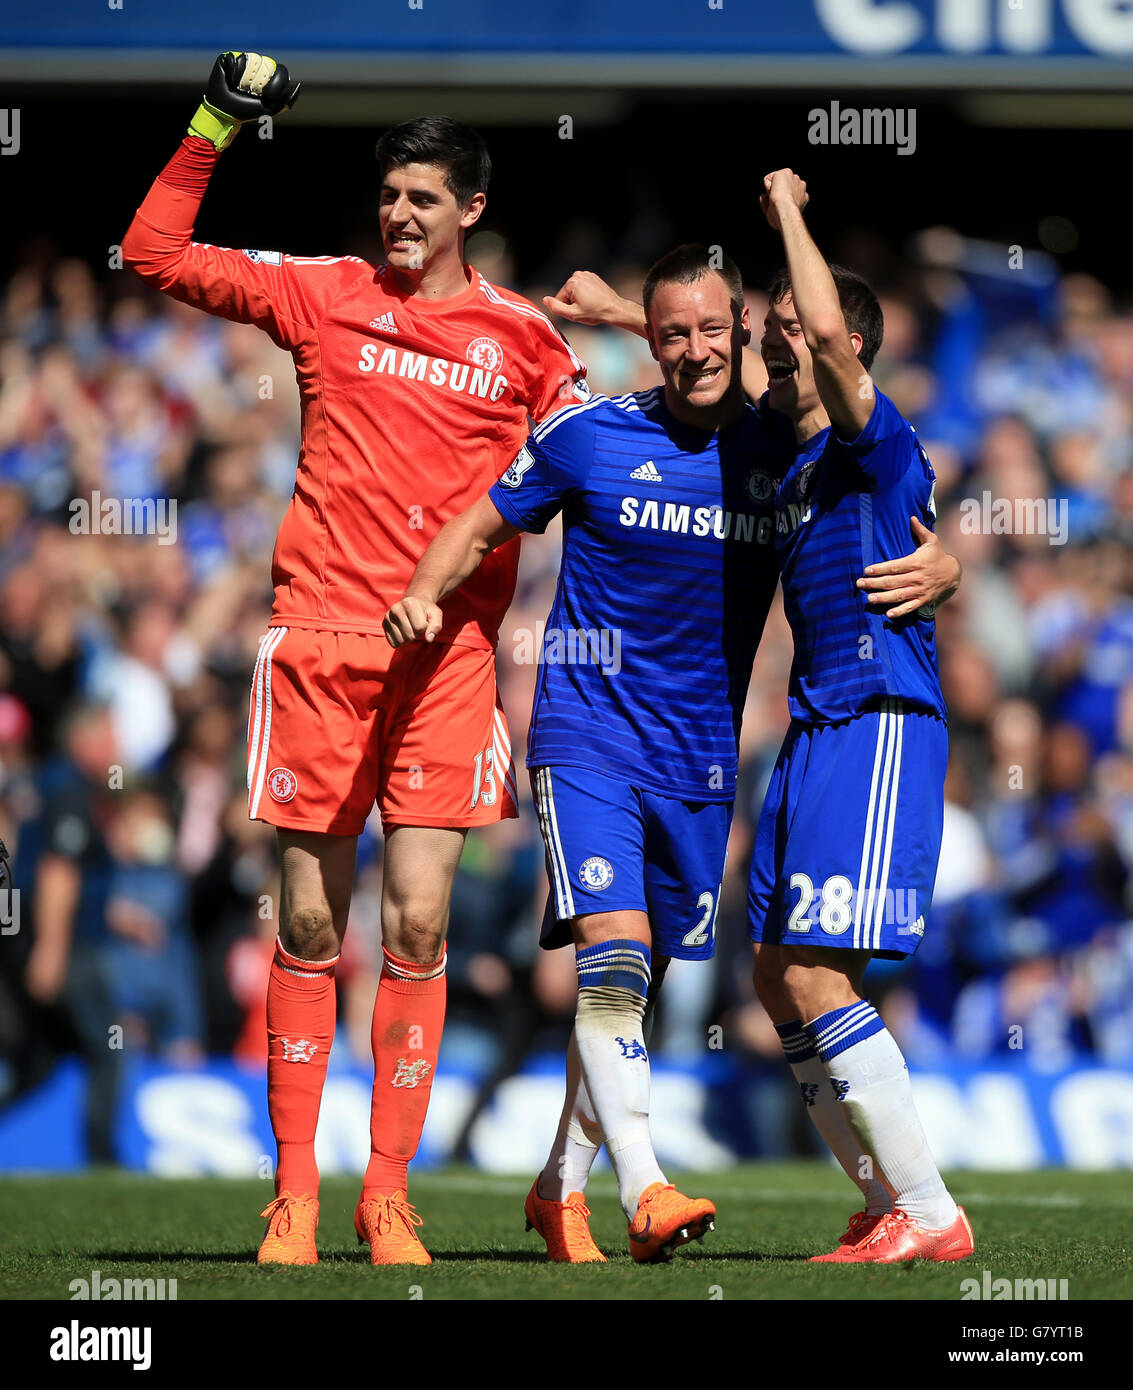 (left to right) Chelsea's Thibaut Courtois, John Terry and Cesar Azpilicueta celebrate winning the title after the Barclays Premier League match at Stamford Bridge, London. PRESS ASSOCIATION Photo. Picture date: Sunday May 3, 2015. See PA story SOCCER Chelsea. Photo credit should read: Nick Potts/PA Wire. RESTRICTIONS: Editorial use only. Maximum 45 images during a match. No video emulation or promotion as 'live'. No use in games, competitions, merchandise, betting or single club/player services. No use with unofficial audio, video, data, fixtures or club/league logos. Stock Photo